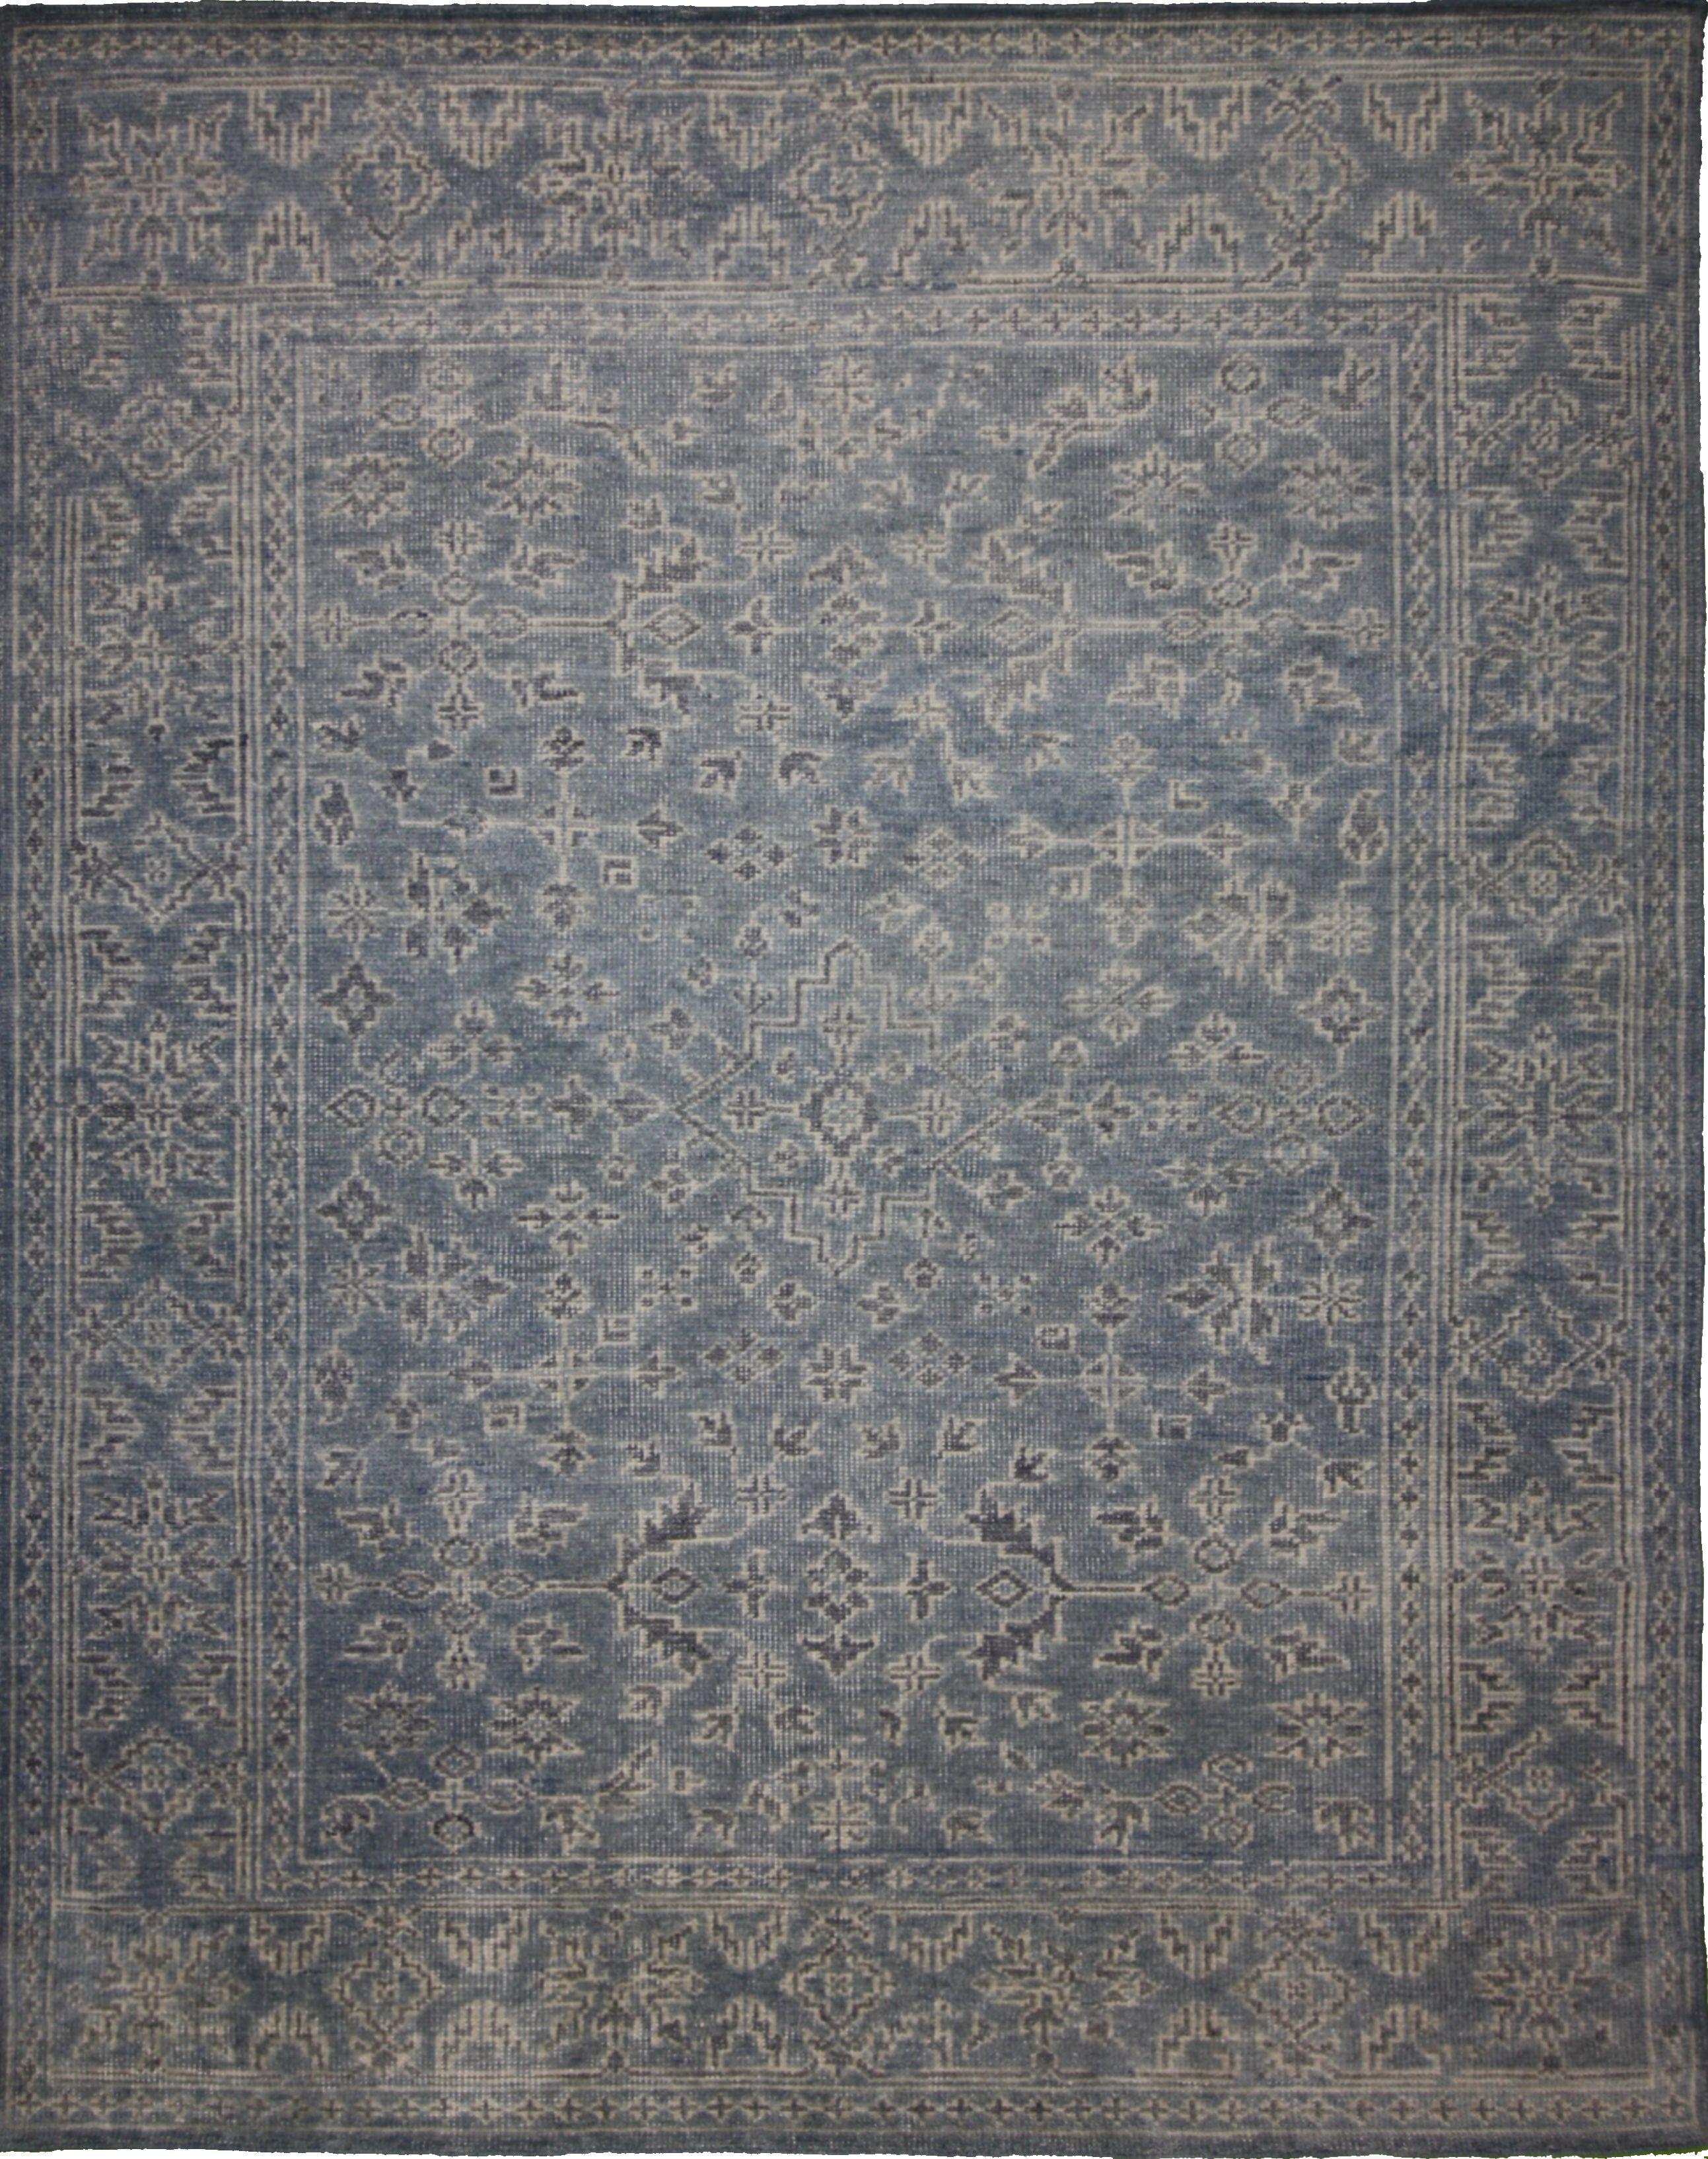 Hand Knotted Wool Gray Transitional India Rug 8' x 10'2"